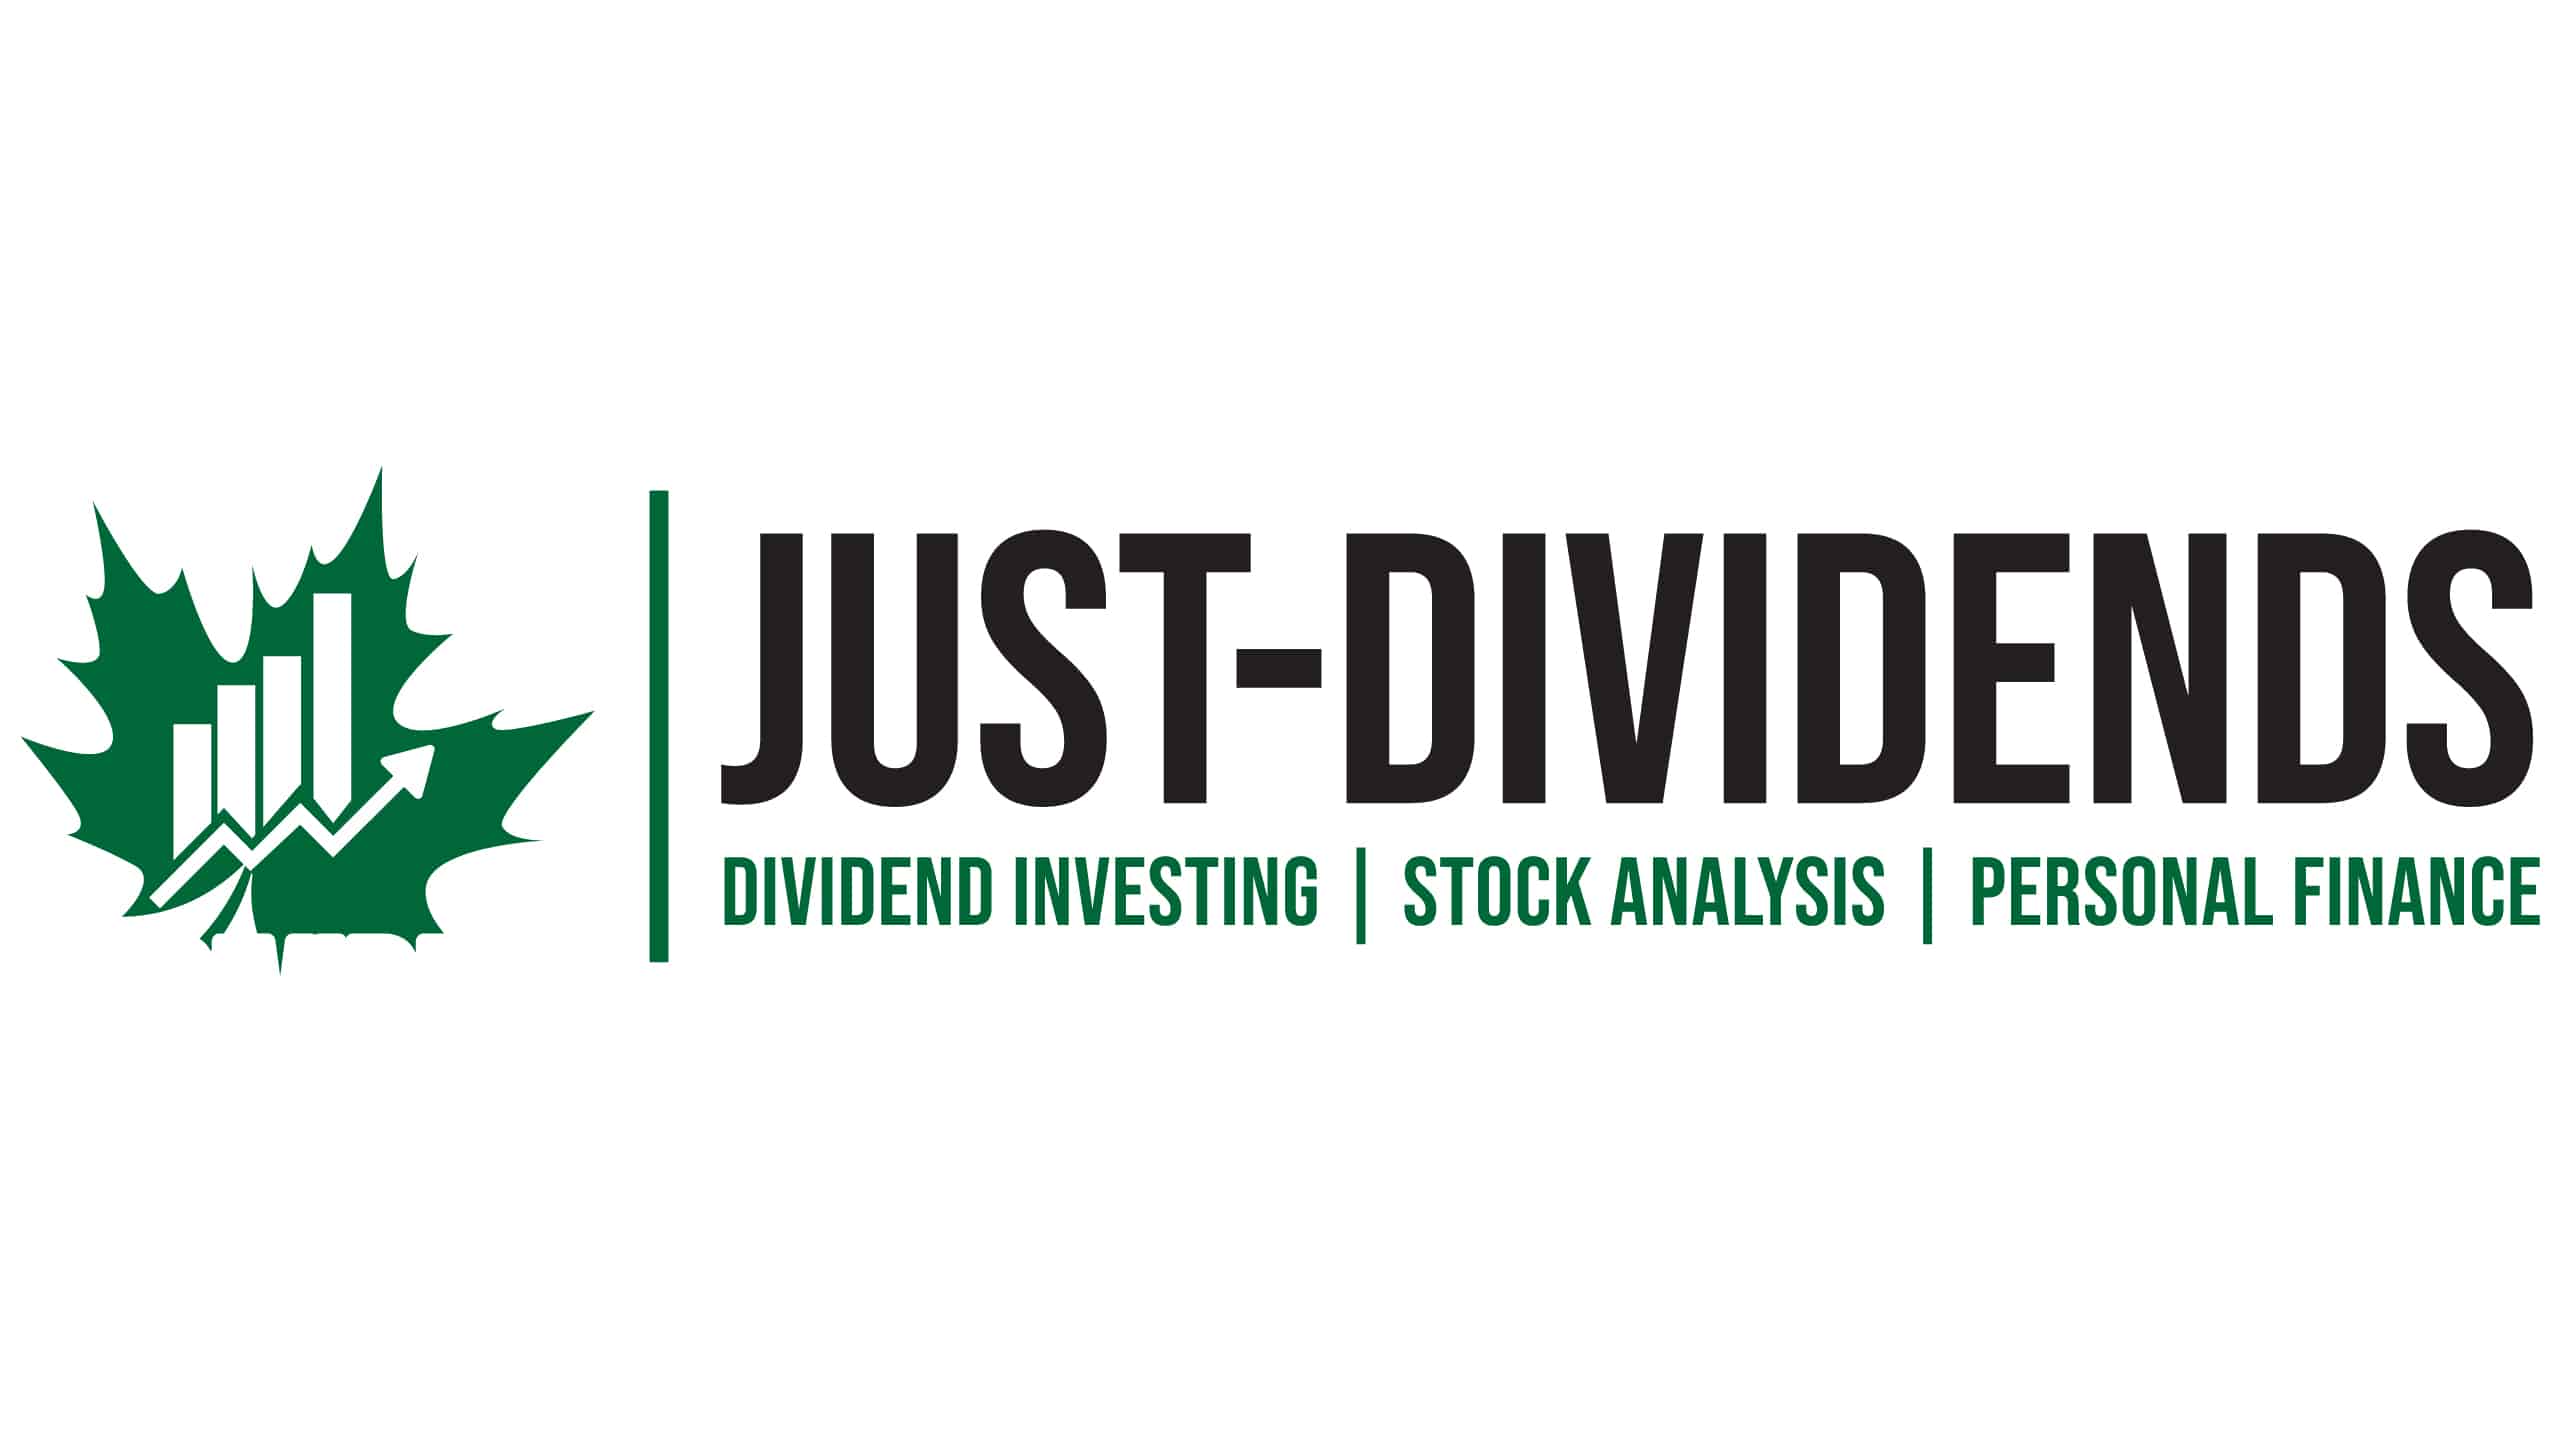 Logo of just-dividends, highlighting their focus on dividend investing, stock analysis, and personal finance, with a green maple leaf motif suggesting a canadian connection or emphasis.